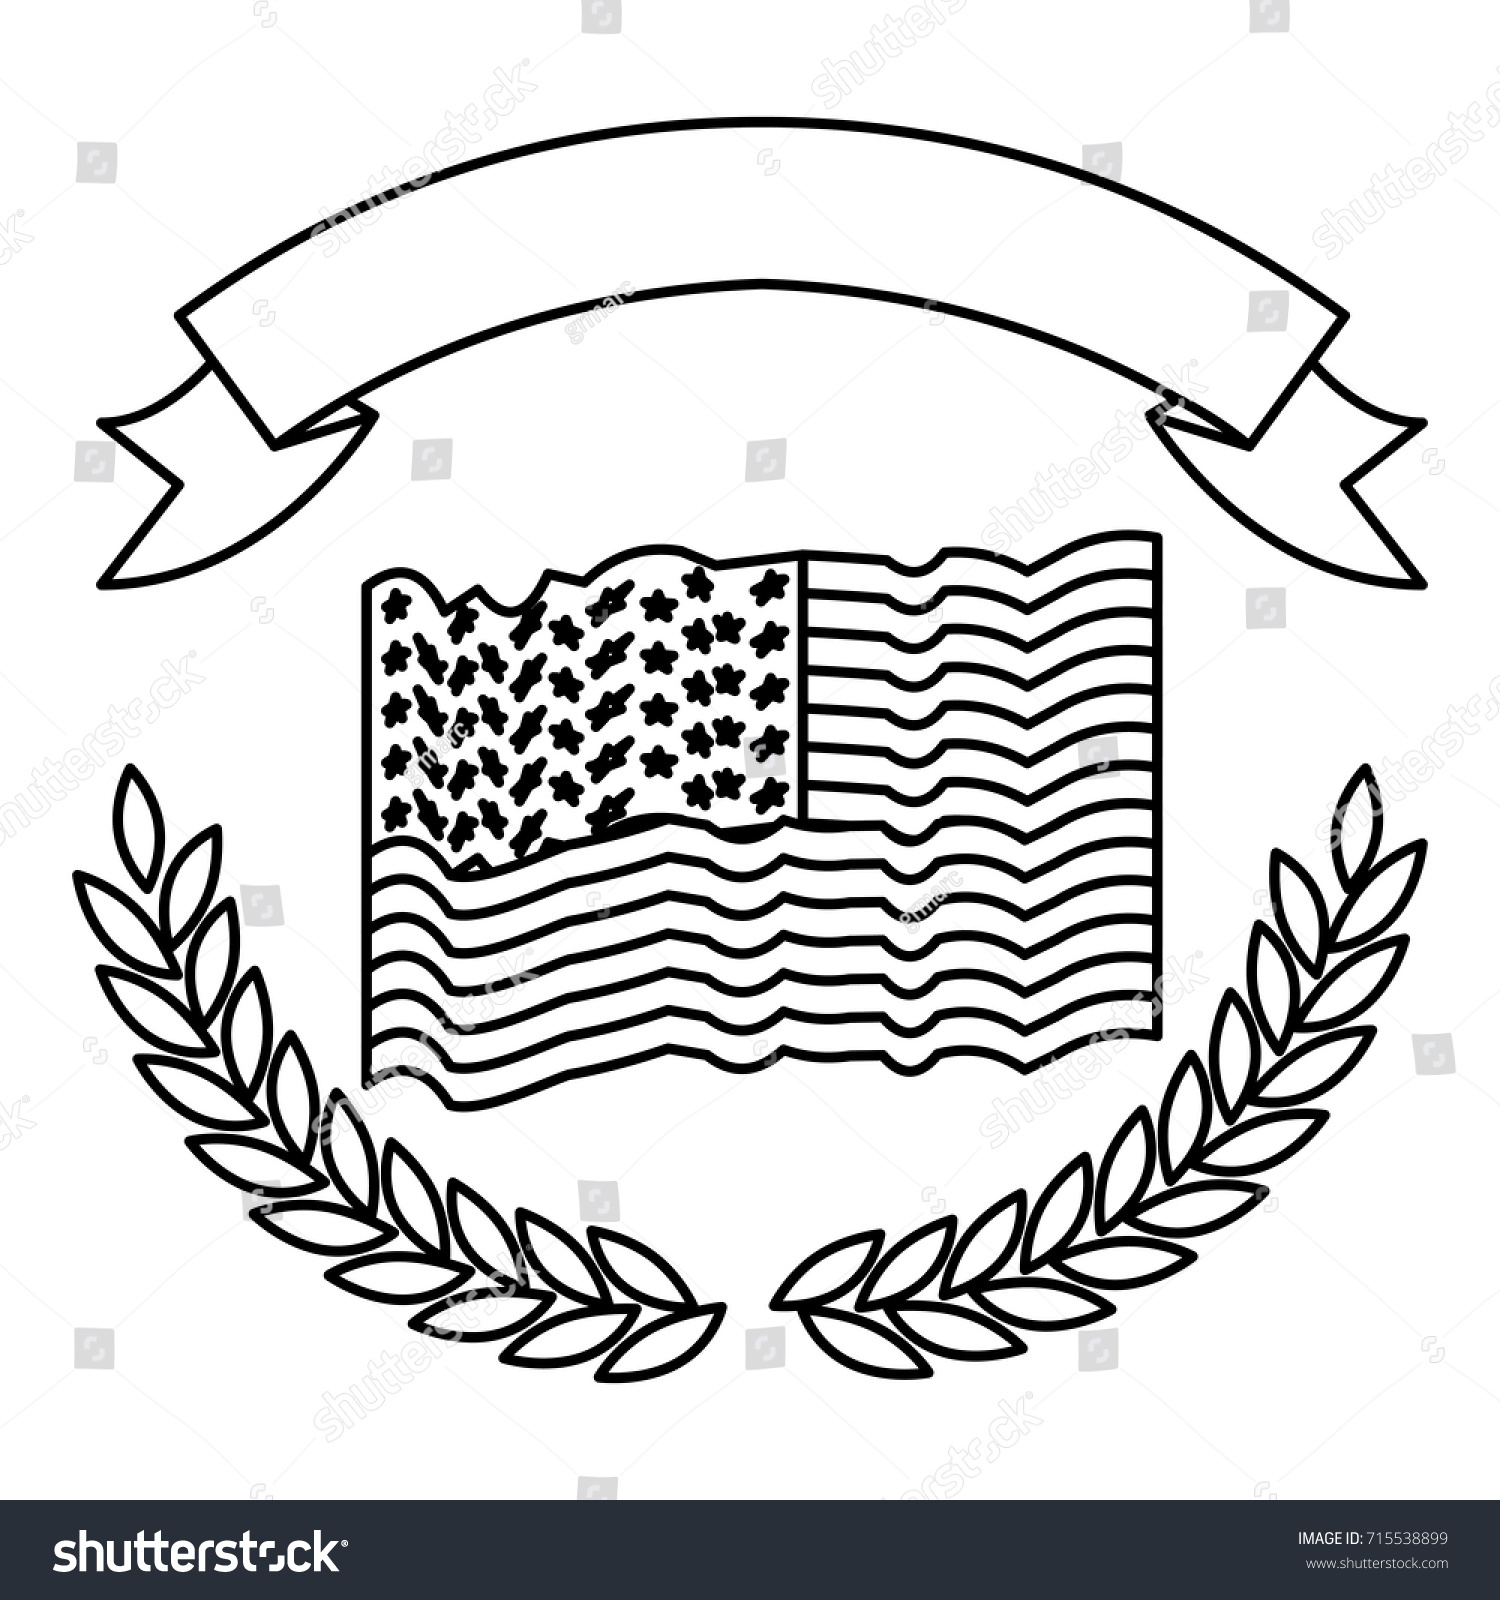 SVG of united states flag with olive branch arch on bottom and thick ribbon on top in monochrome silhouette vector illustration svg